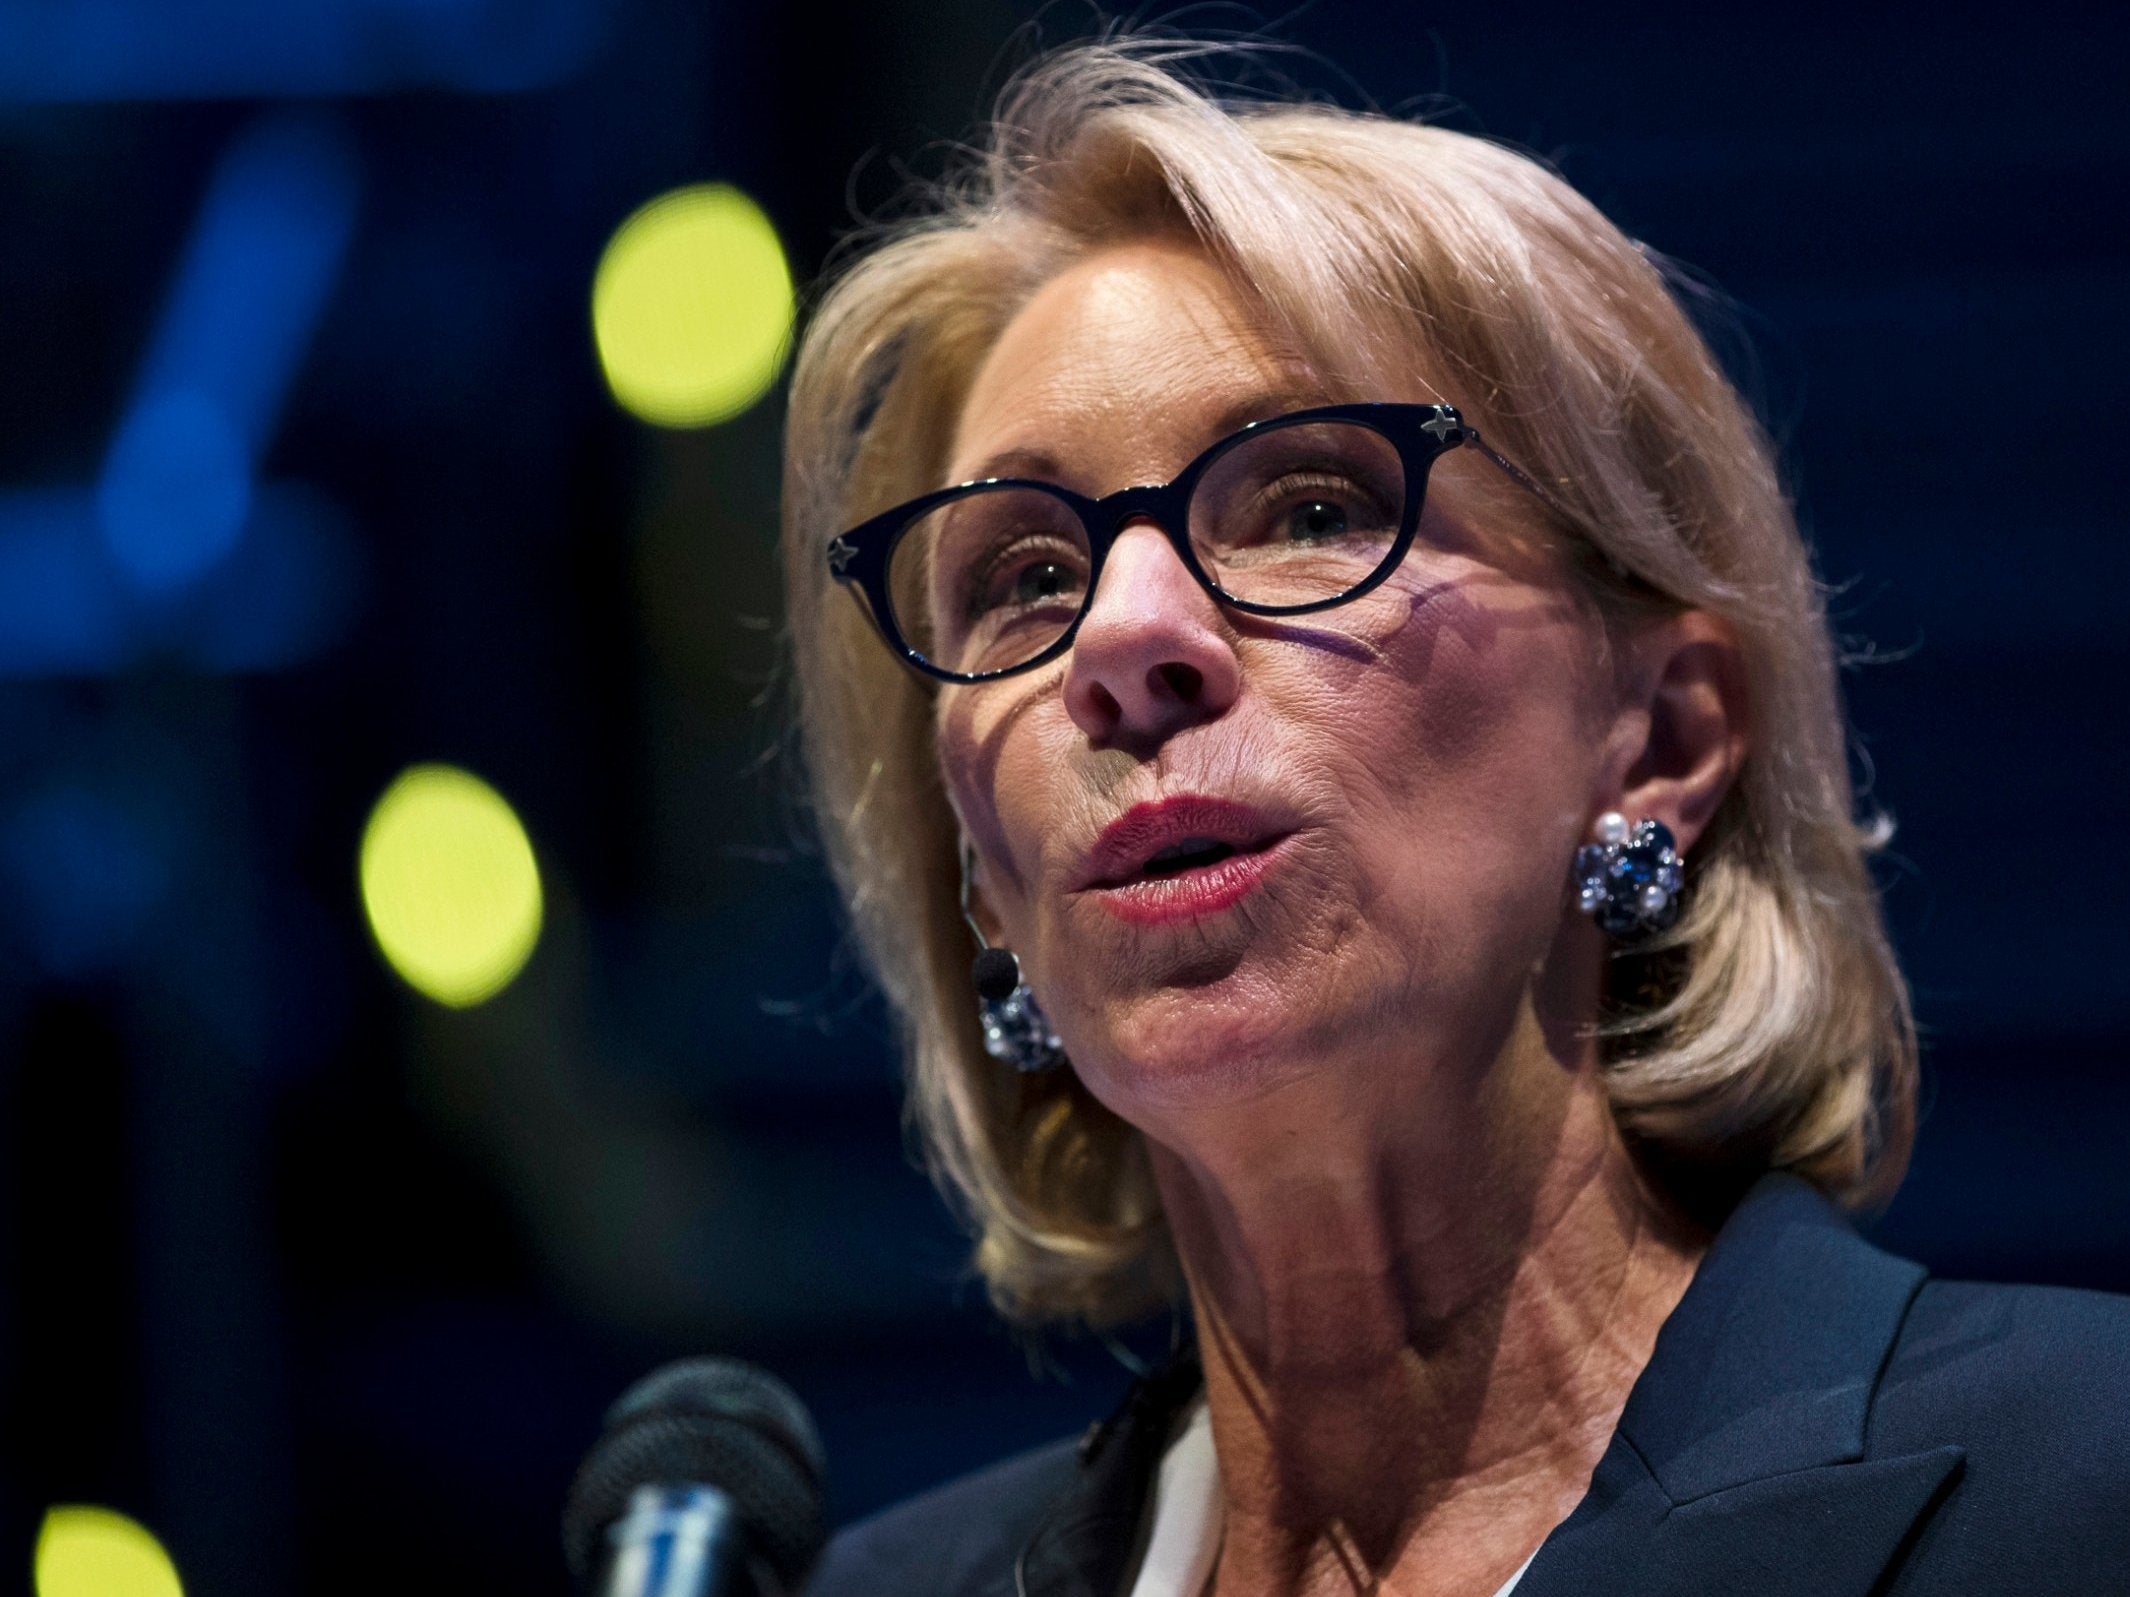 The Education Department has been bombarded with tens of thousands of comments responding to Education Secretary Betsy Devos’ proposed rules